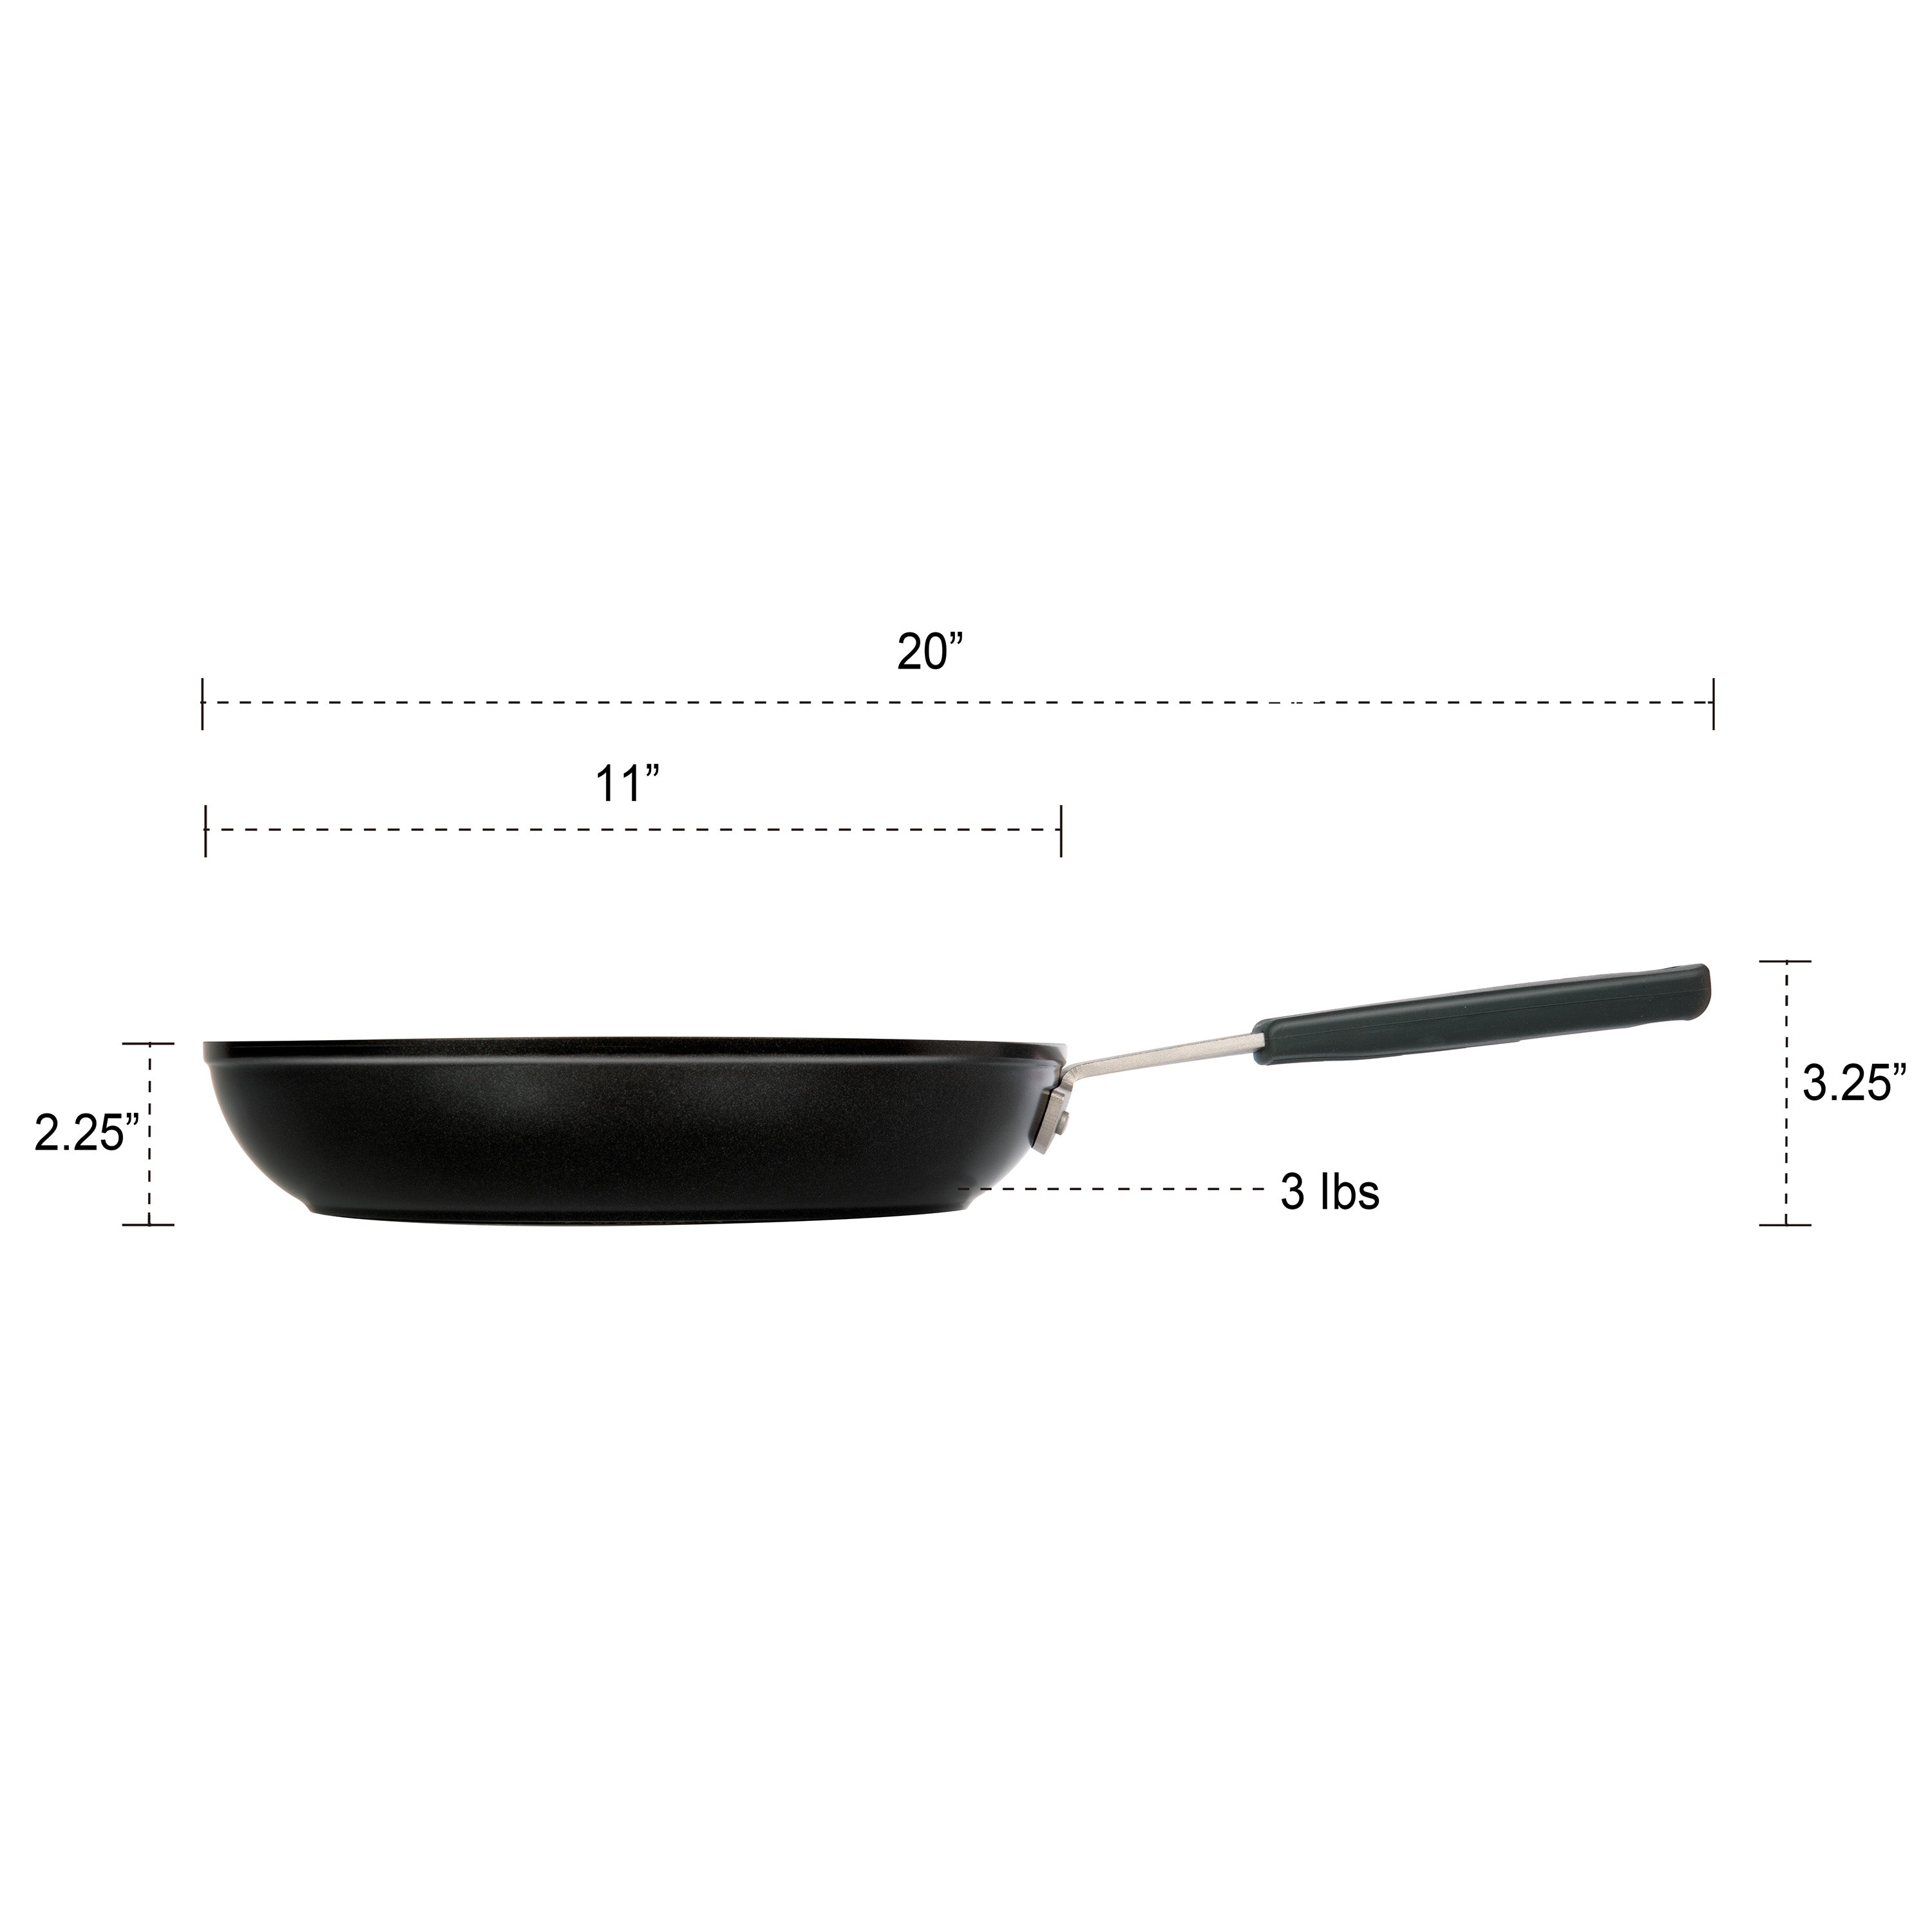 FRY PAN & SKILLET, NON-STICK ALUMINIUM COOKWARE WITH STAINLESS STEEL CHEF’S HANDLE, 11” (28cm)